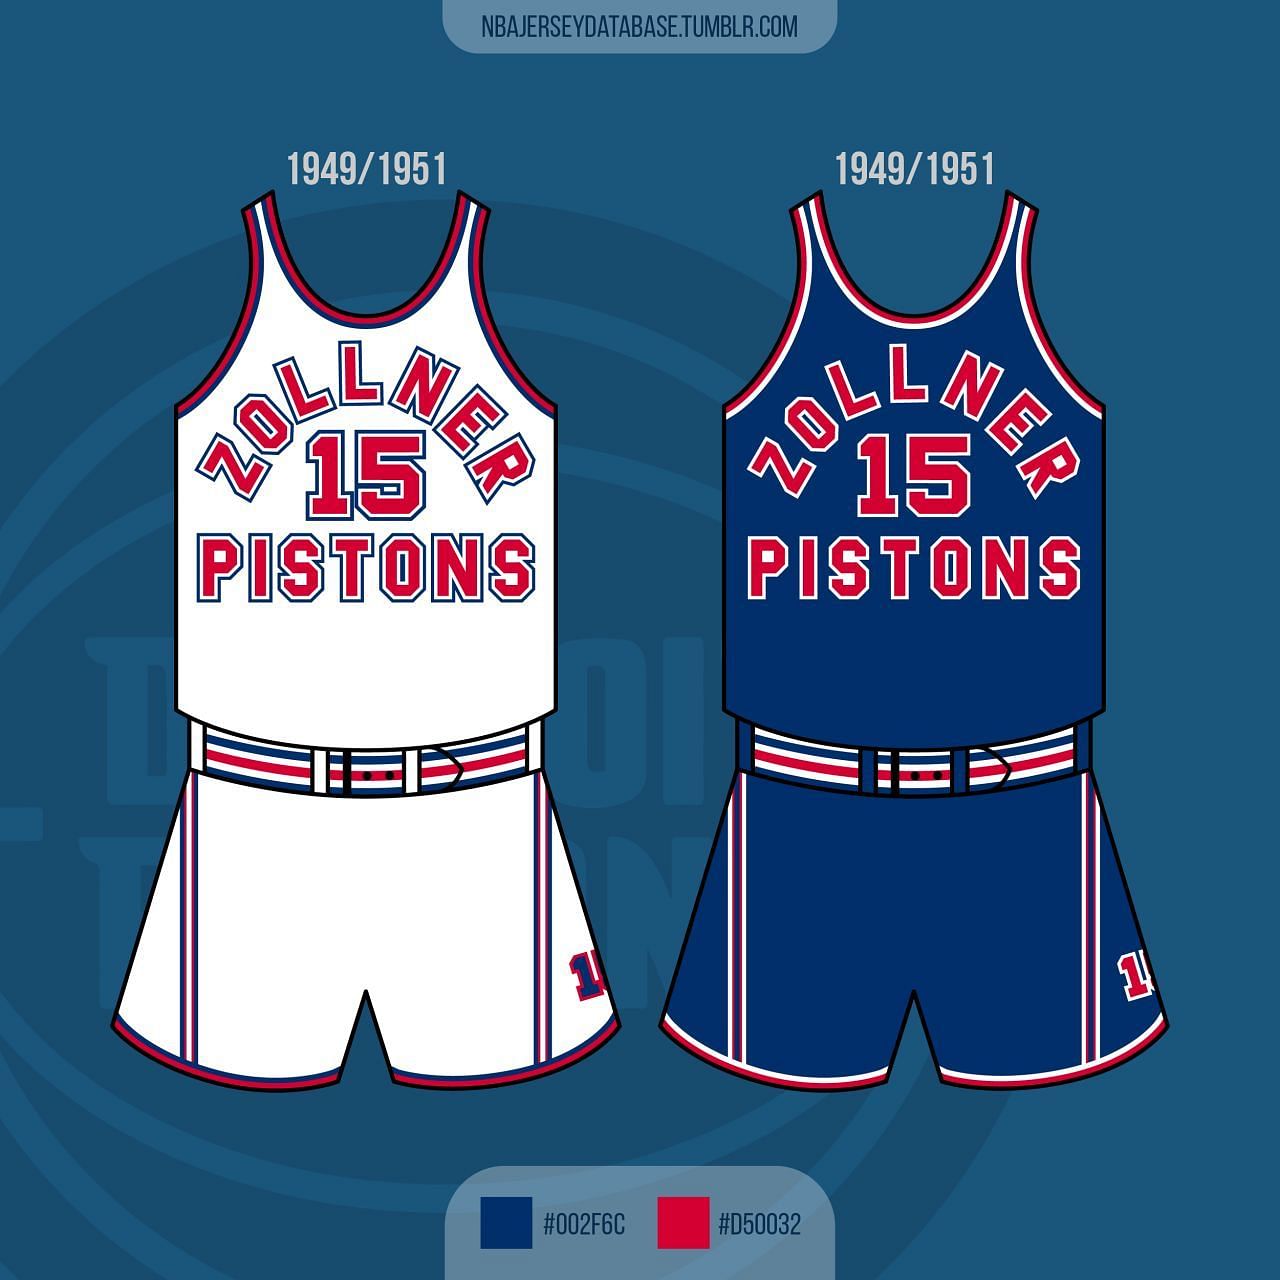 Home and away team kit for the defunct Fort Wayne - Zollner Pistons